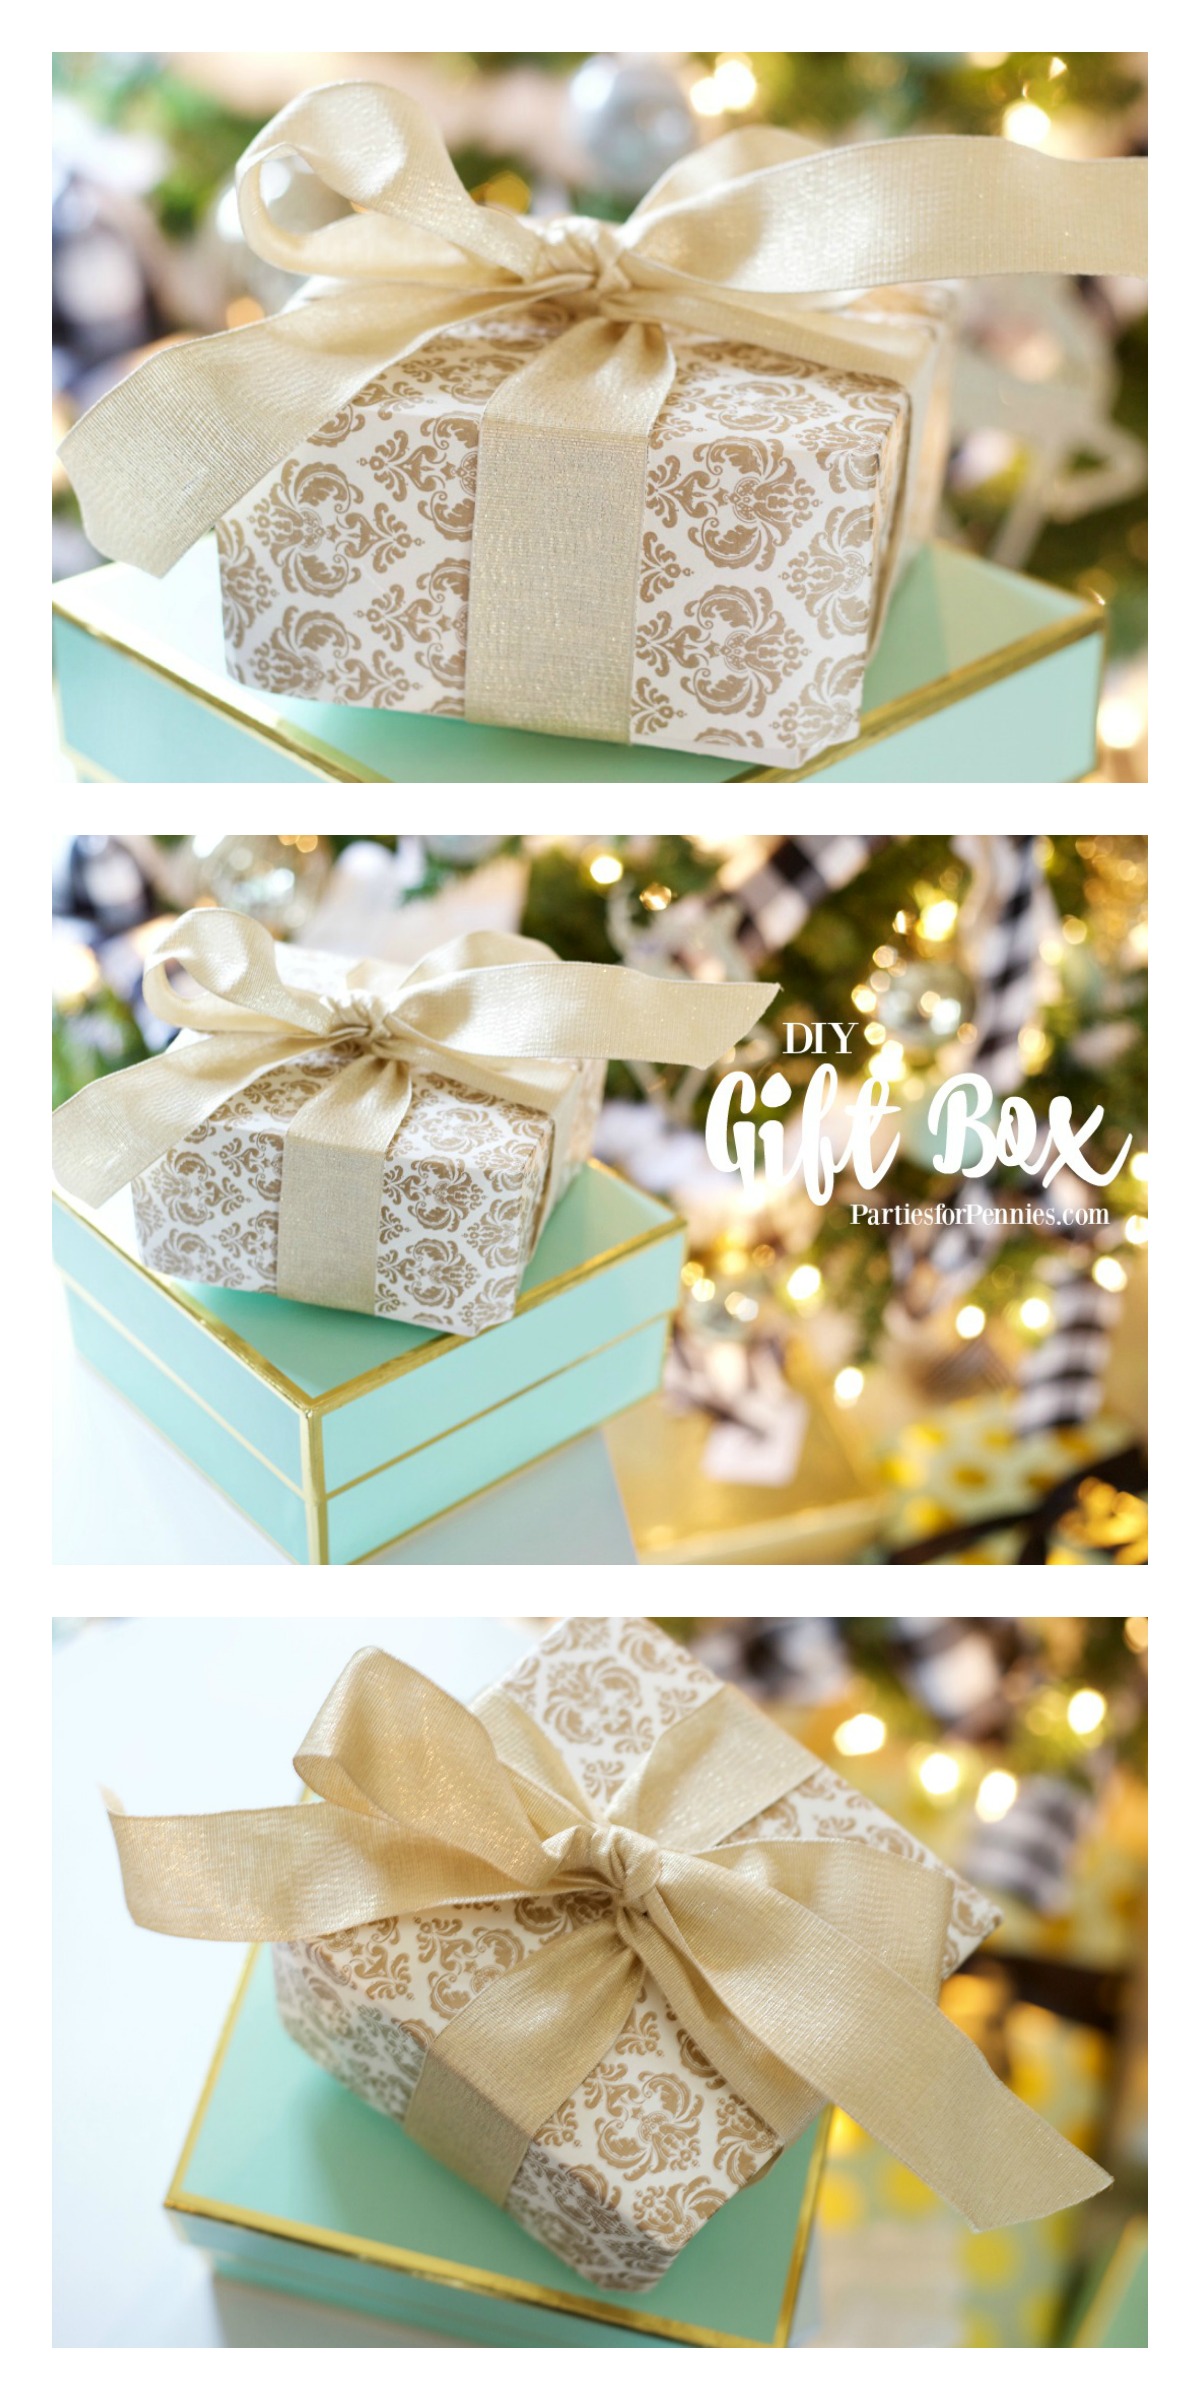 DIY Gift Box by PartiesforPennies.com | Gift Wrap, Homemade Gift, Christmas, Present, Paper Craft